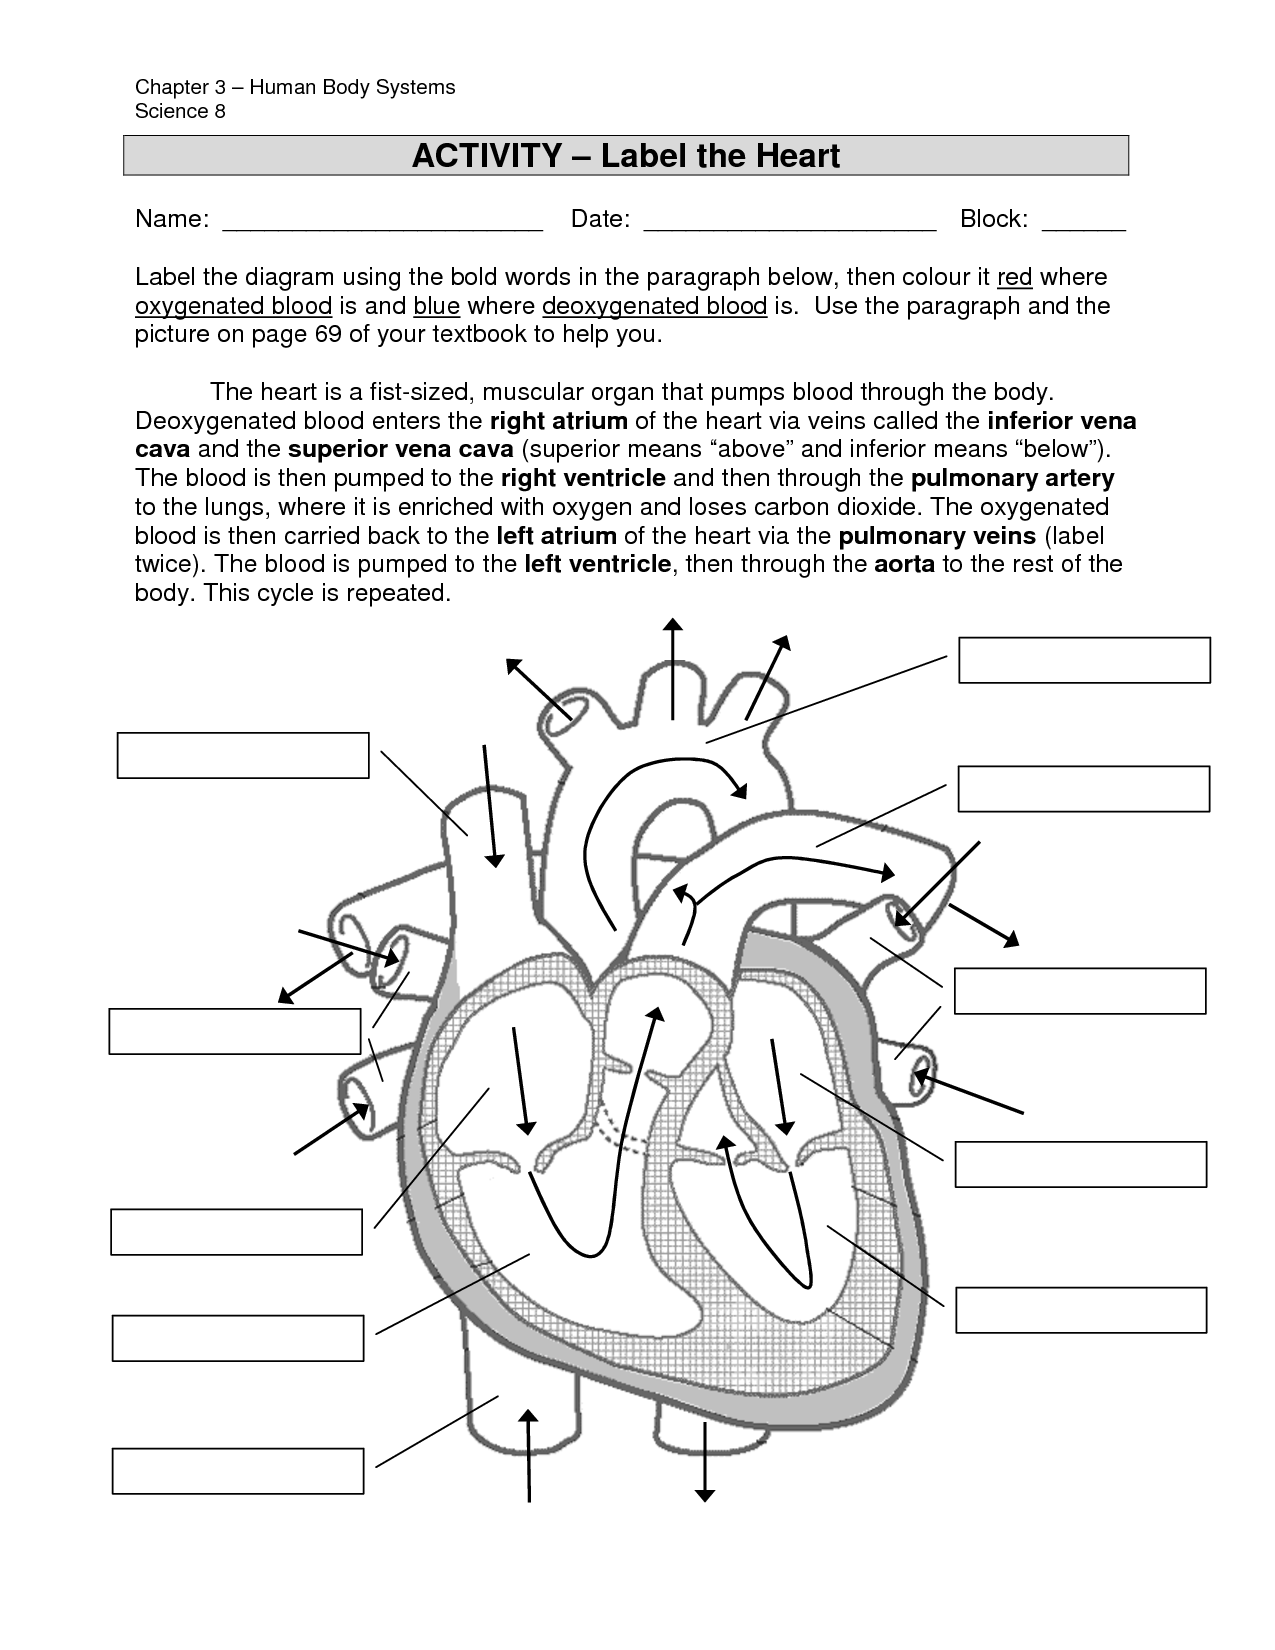 4 Best Images of Printable Heart Diagram To Label - Label ...